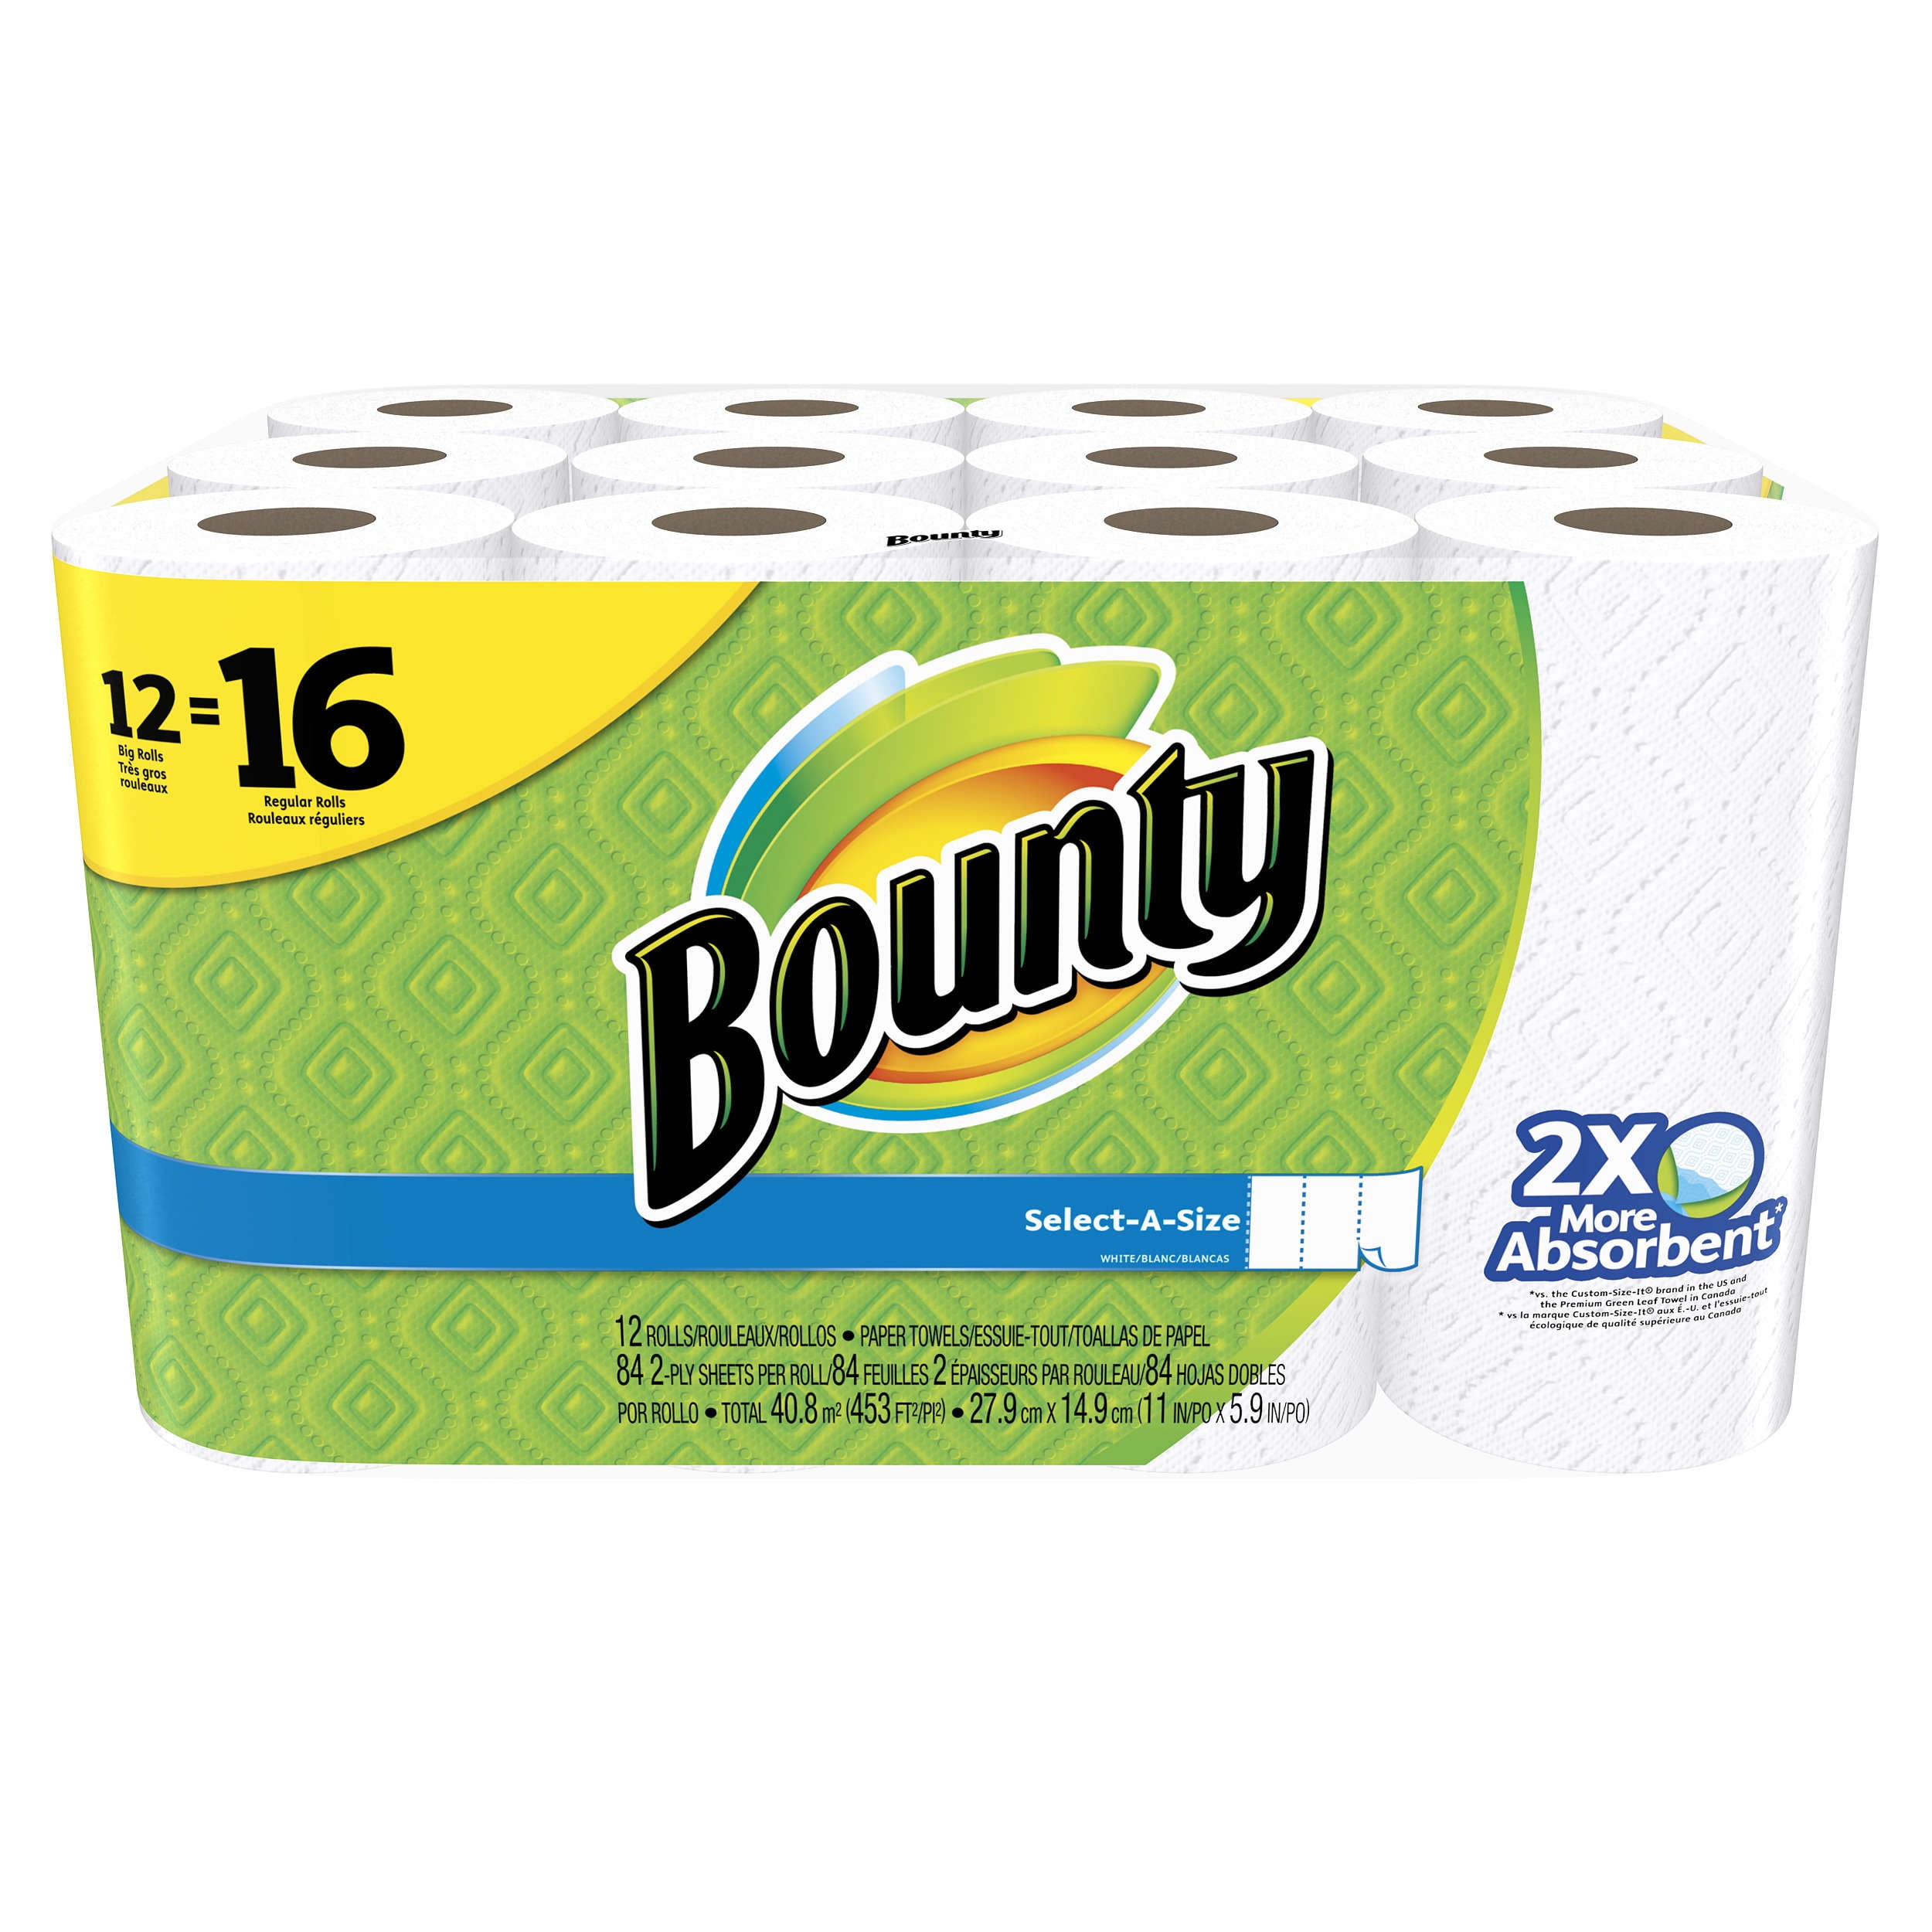 Details about   Bounty Select-A-Size Paper Towels White 8 Triple Rolls = 24 Regular Rolls 